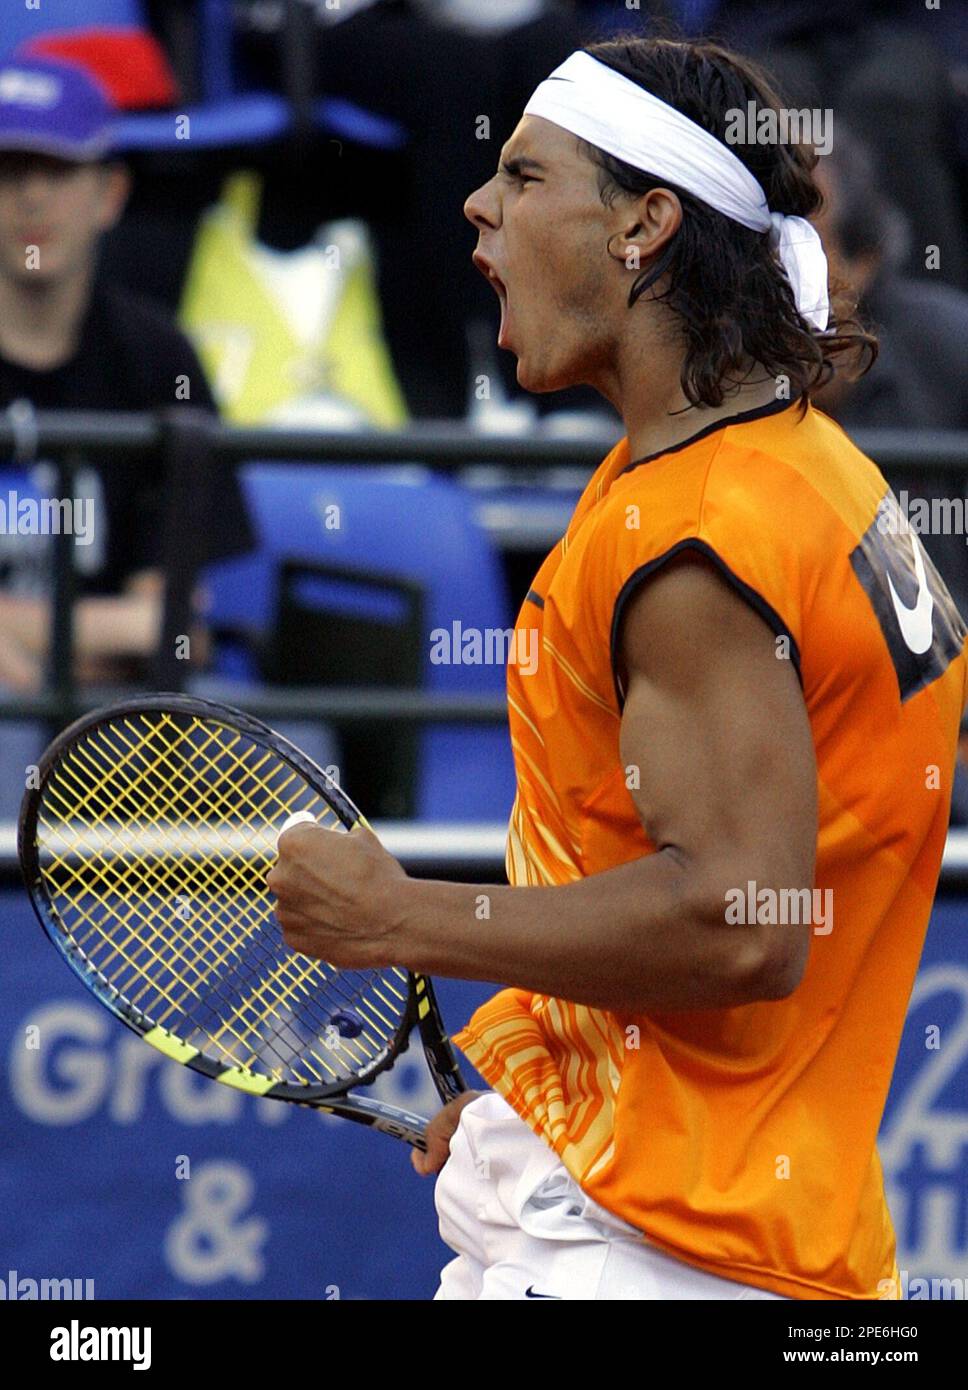 Spain's Rafael Nadal celebrates after winning a point to Czech Republic's  Radek Stepanek during the Rome Masters tennis tournment at Rome's Foro  Italico, Friday, May 6, 2005. Nadal beat Stepanek 5-7, 6-1,